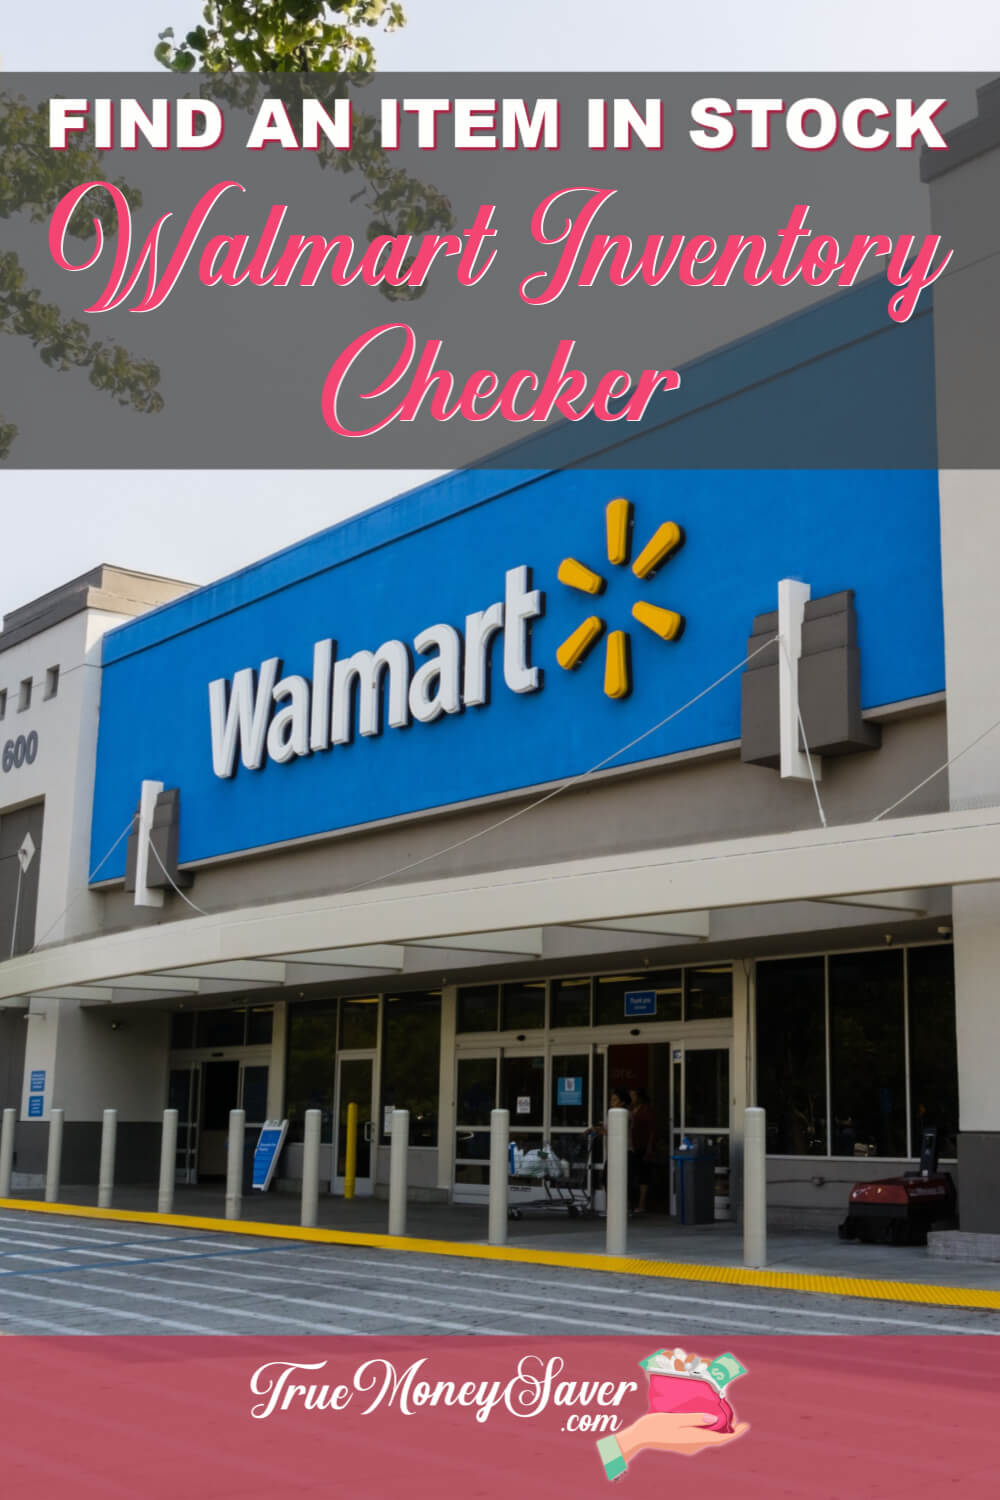 How To Know If It Is On The Shelf With The Walmart Inventory Checker